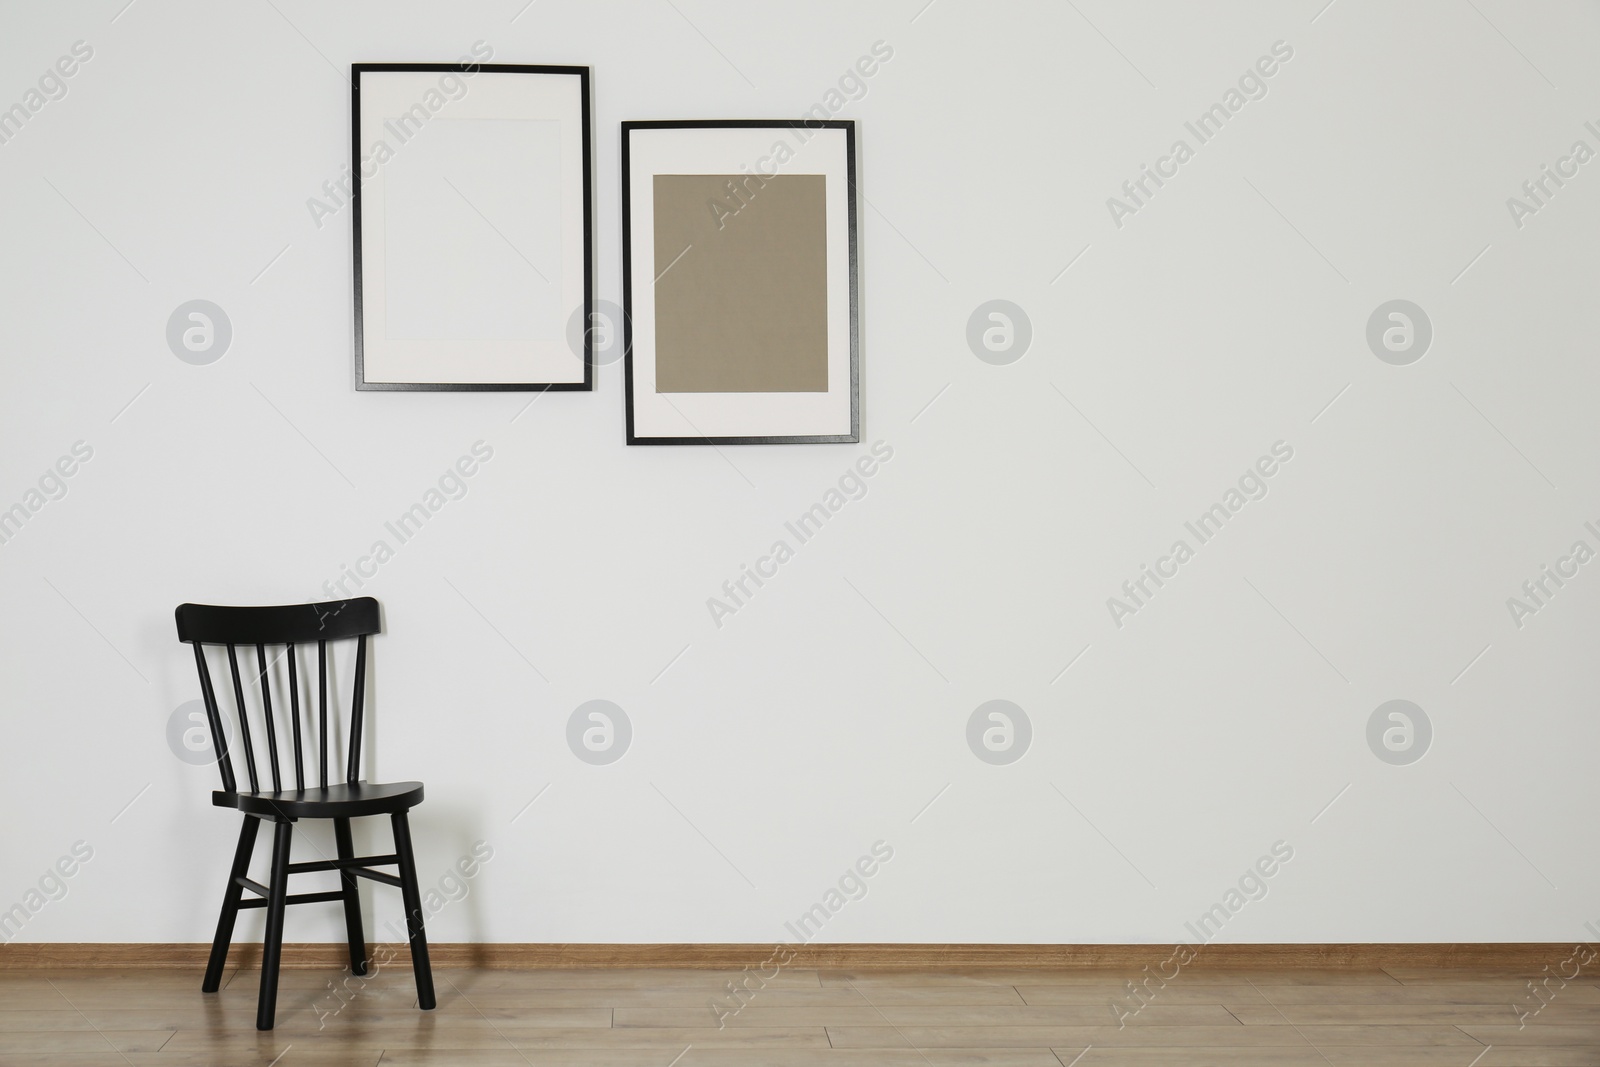 Photo of Black chair and frames in room with white wall, space for text. Interior design